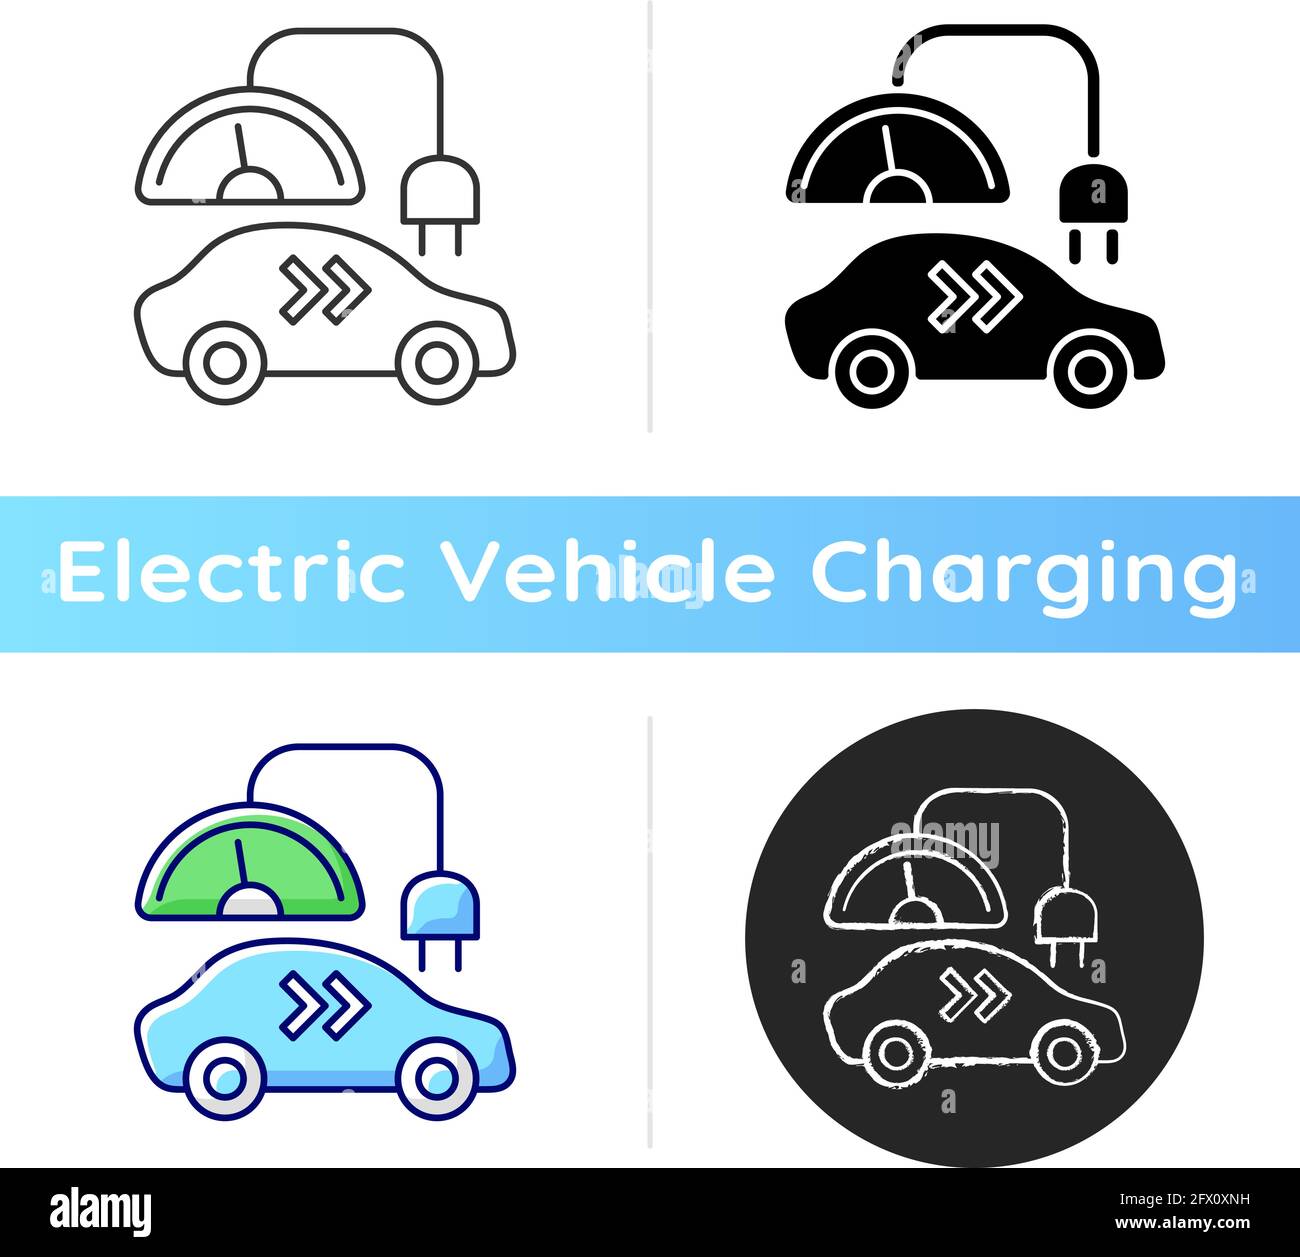 Level 2 charger icon Stock Vector